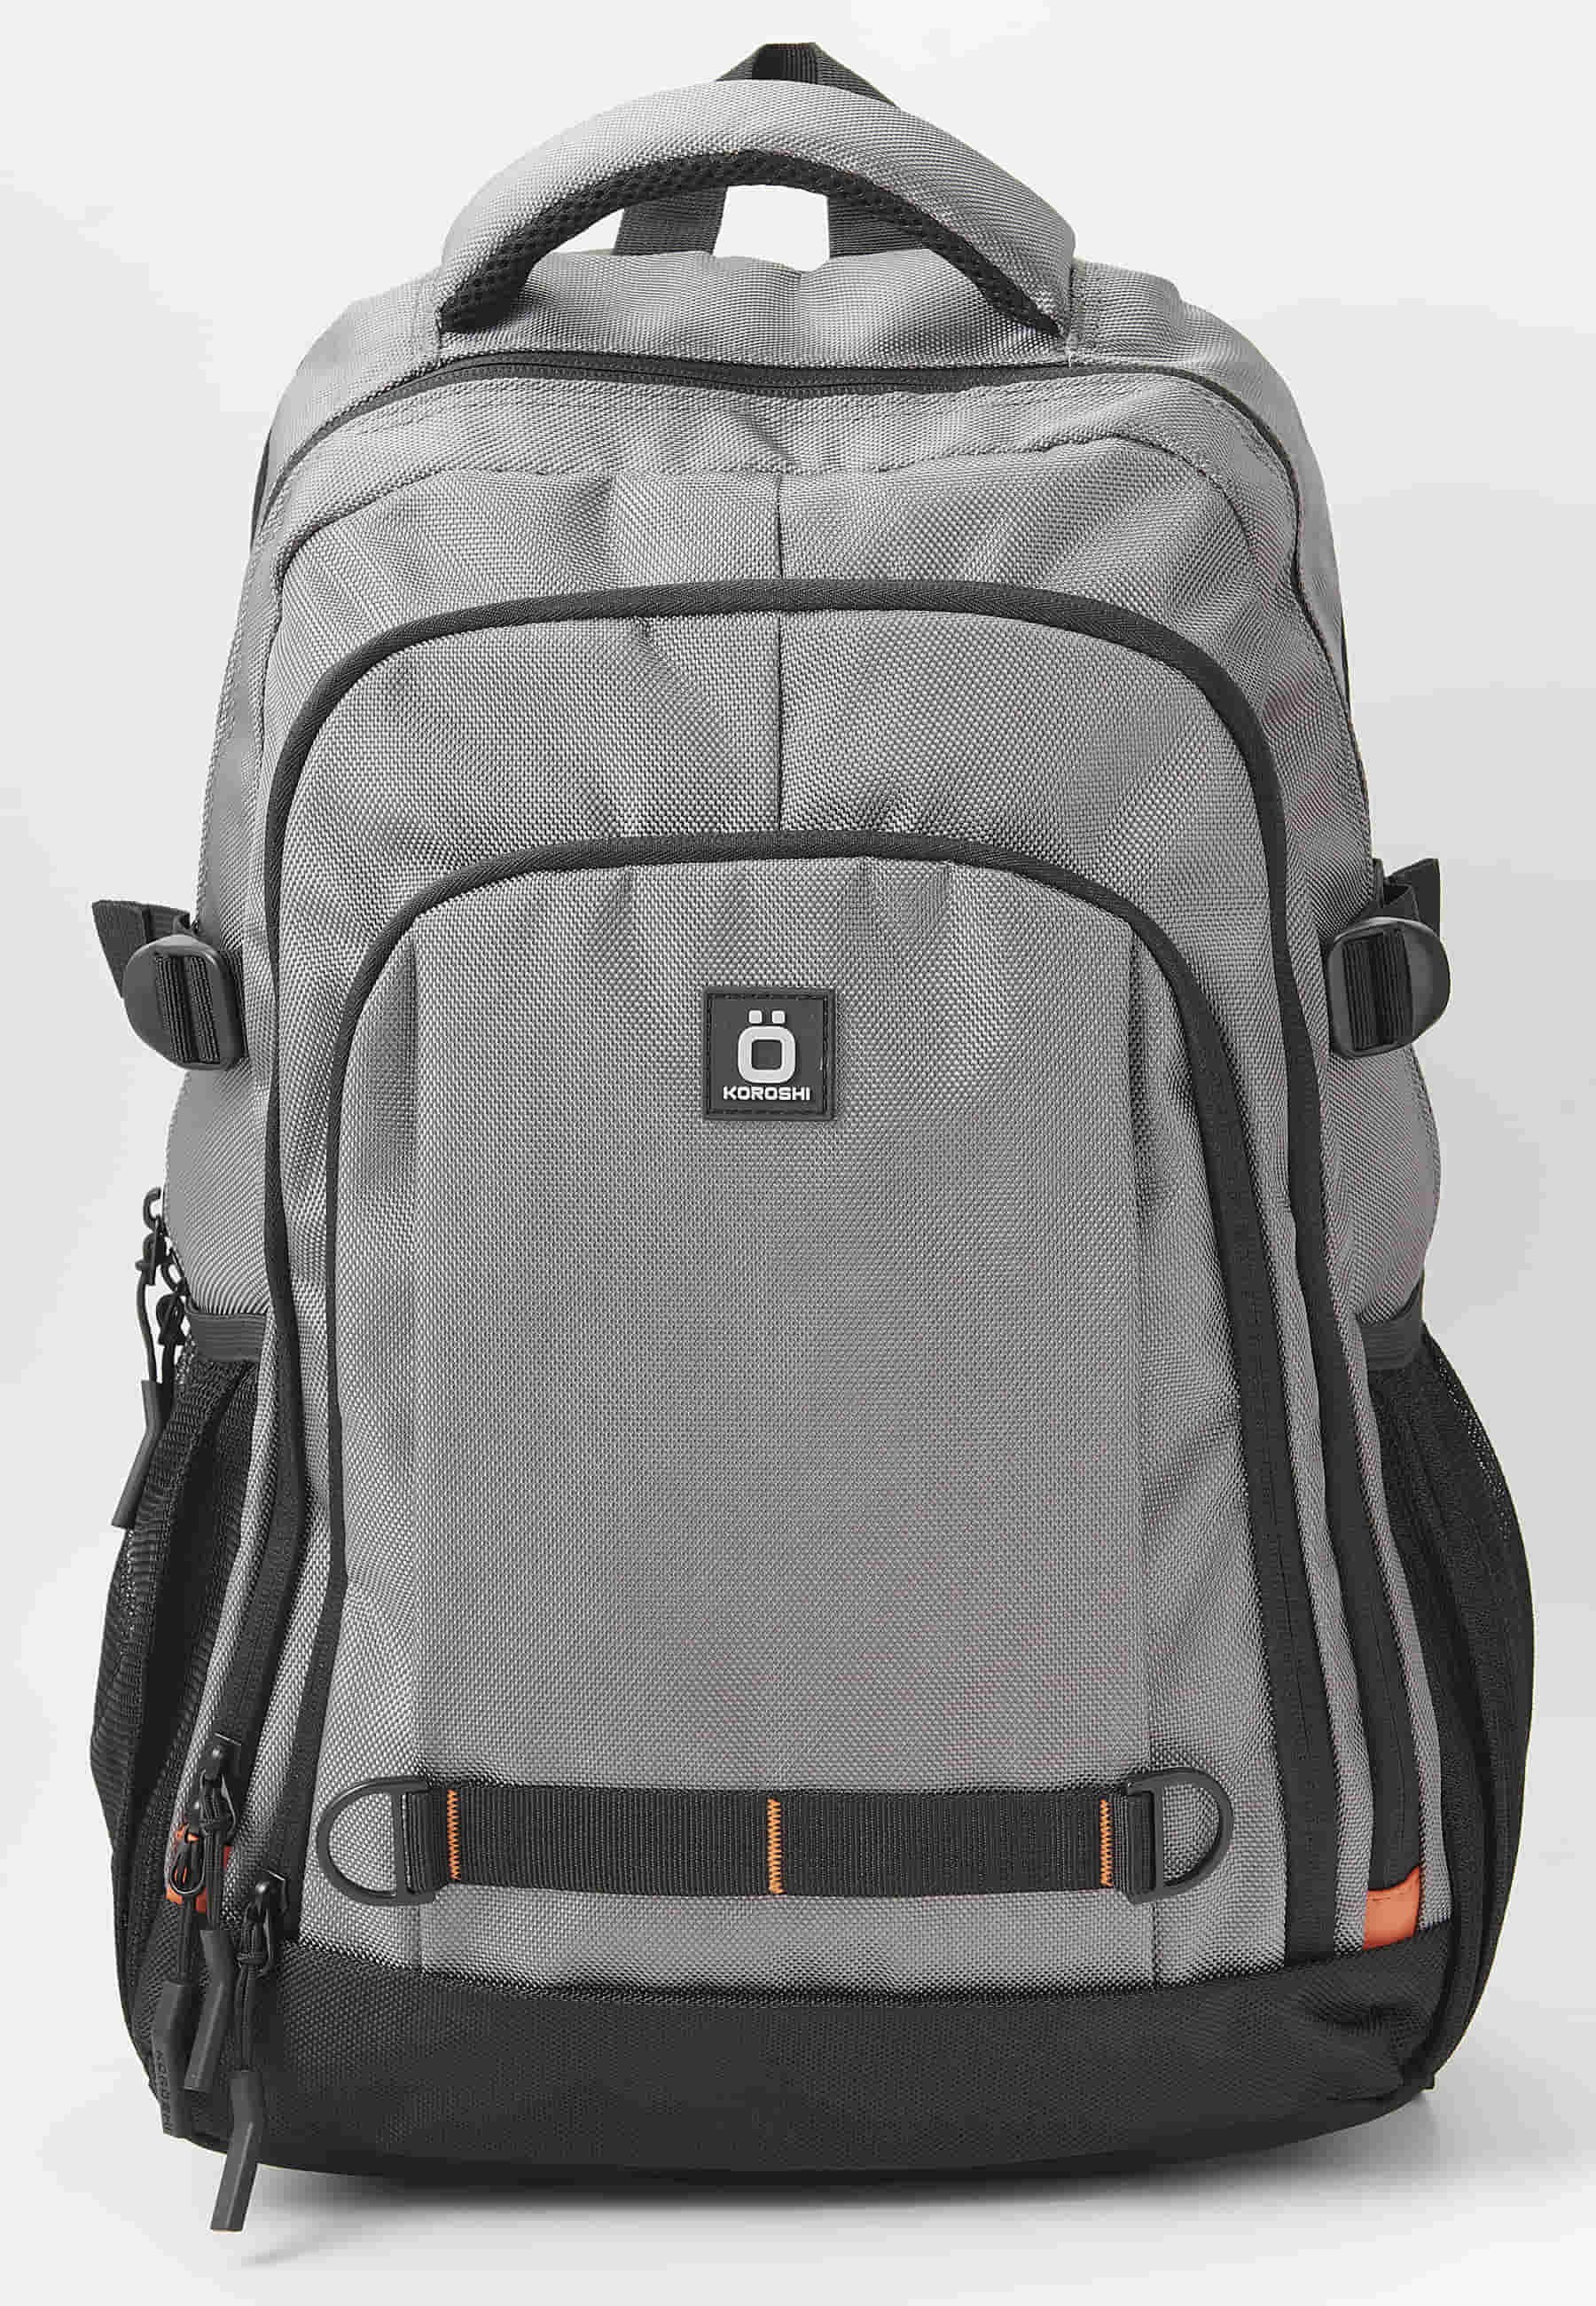 Koröshi backpack with three zippered compartments, one for laptop, with Gray interior pockets